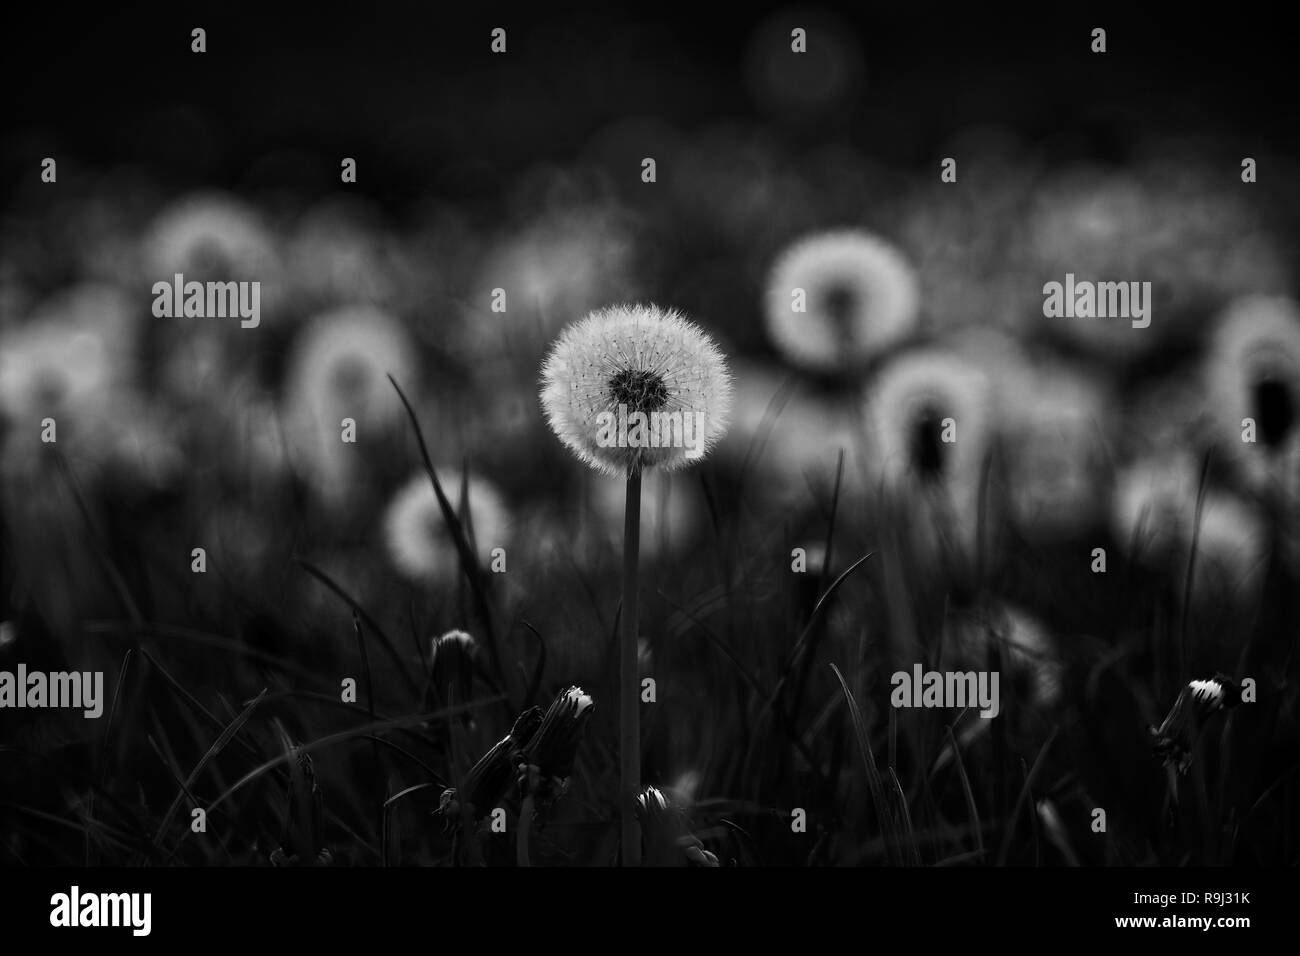 Dandelion seeds in silhouette Black and White Stock Photos & Images - Alamy